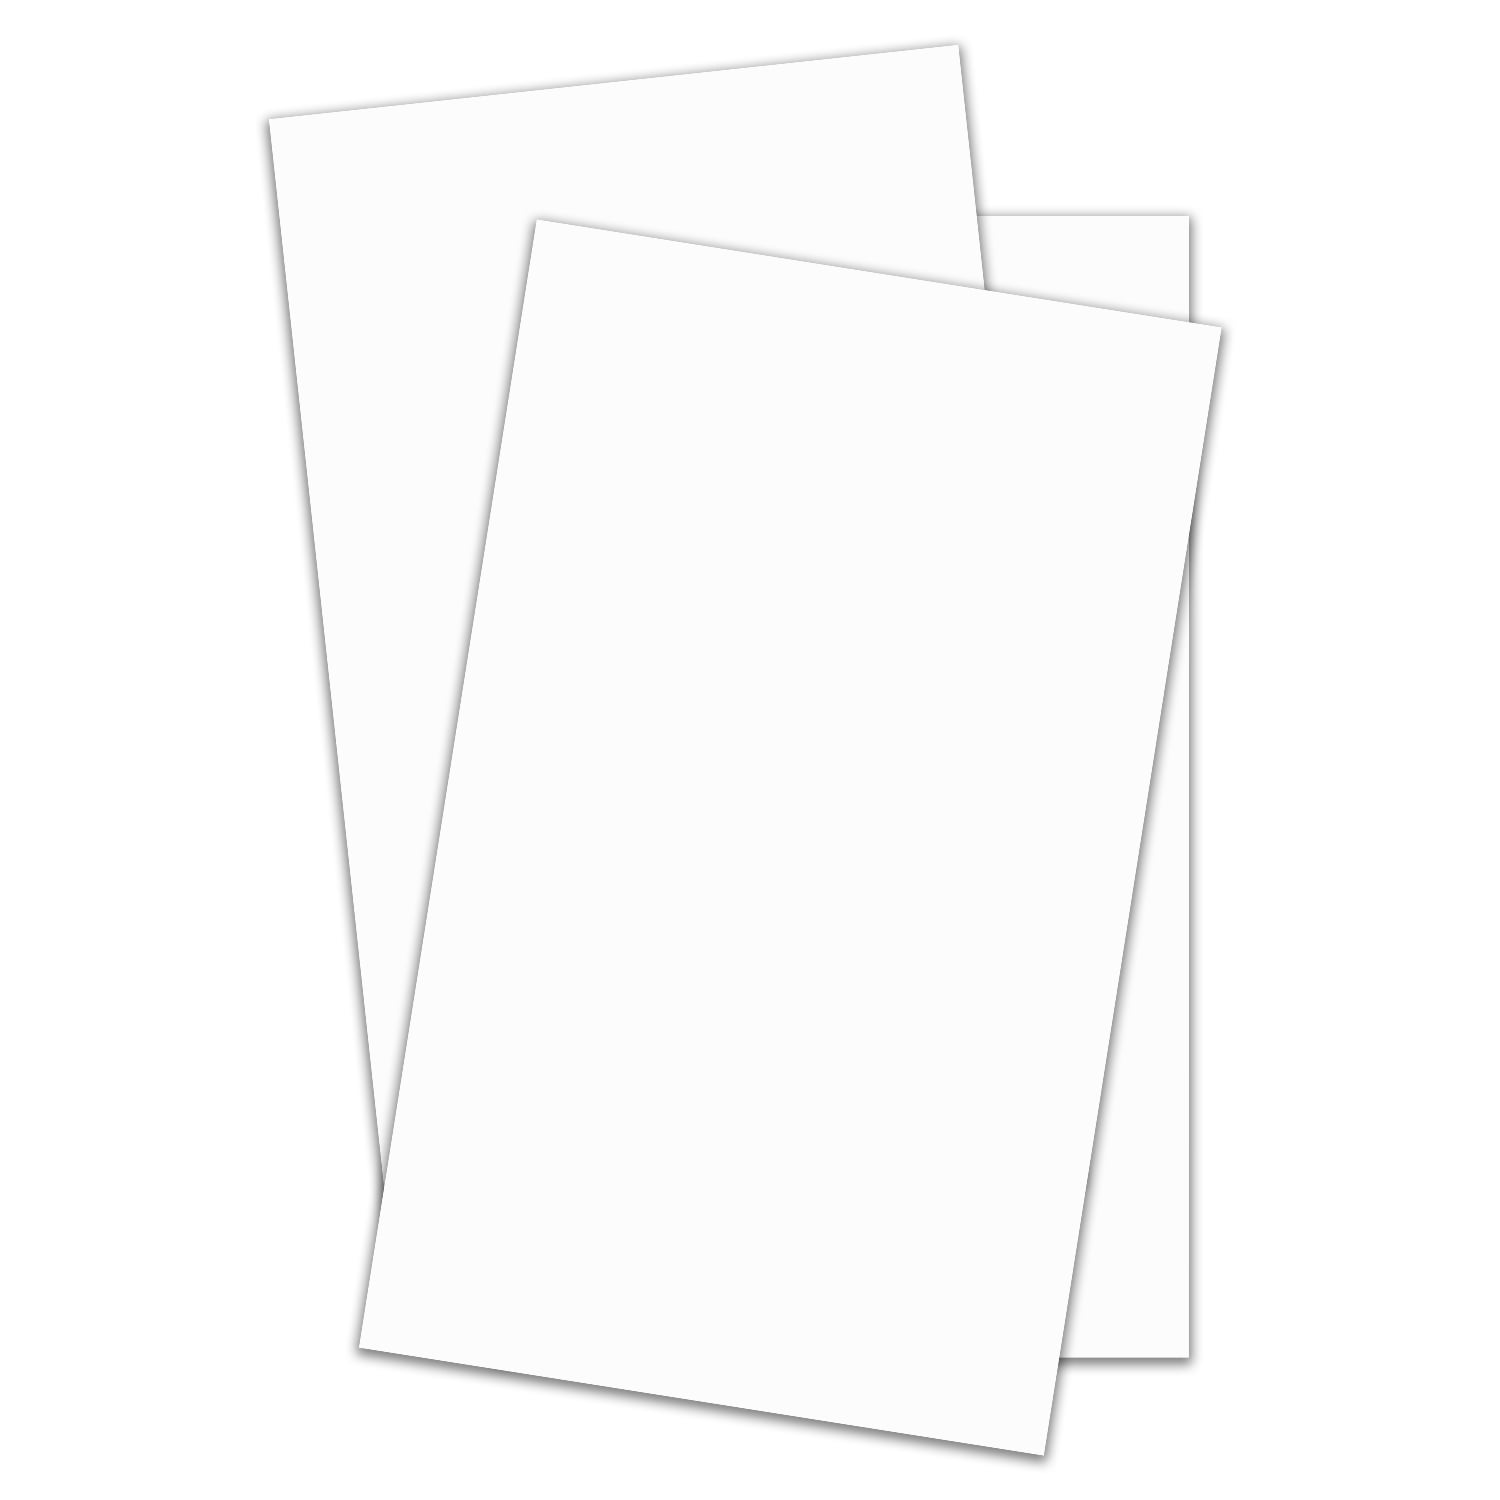 Epic Black Card Stock - 18 x 12 in 100 lb Cover Smooth Digital 30